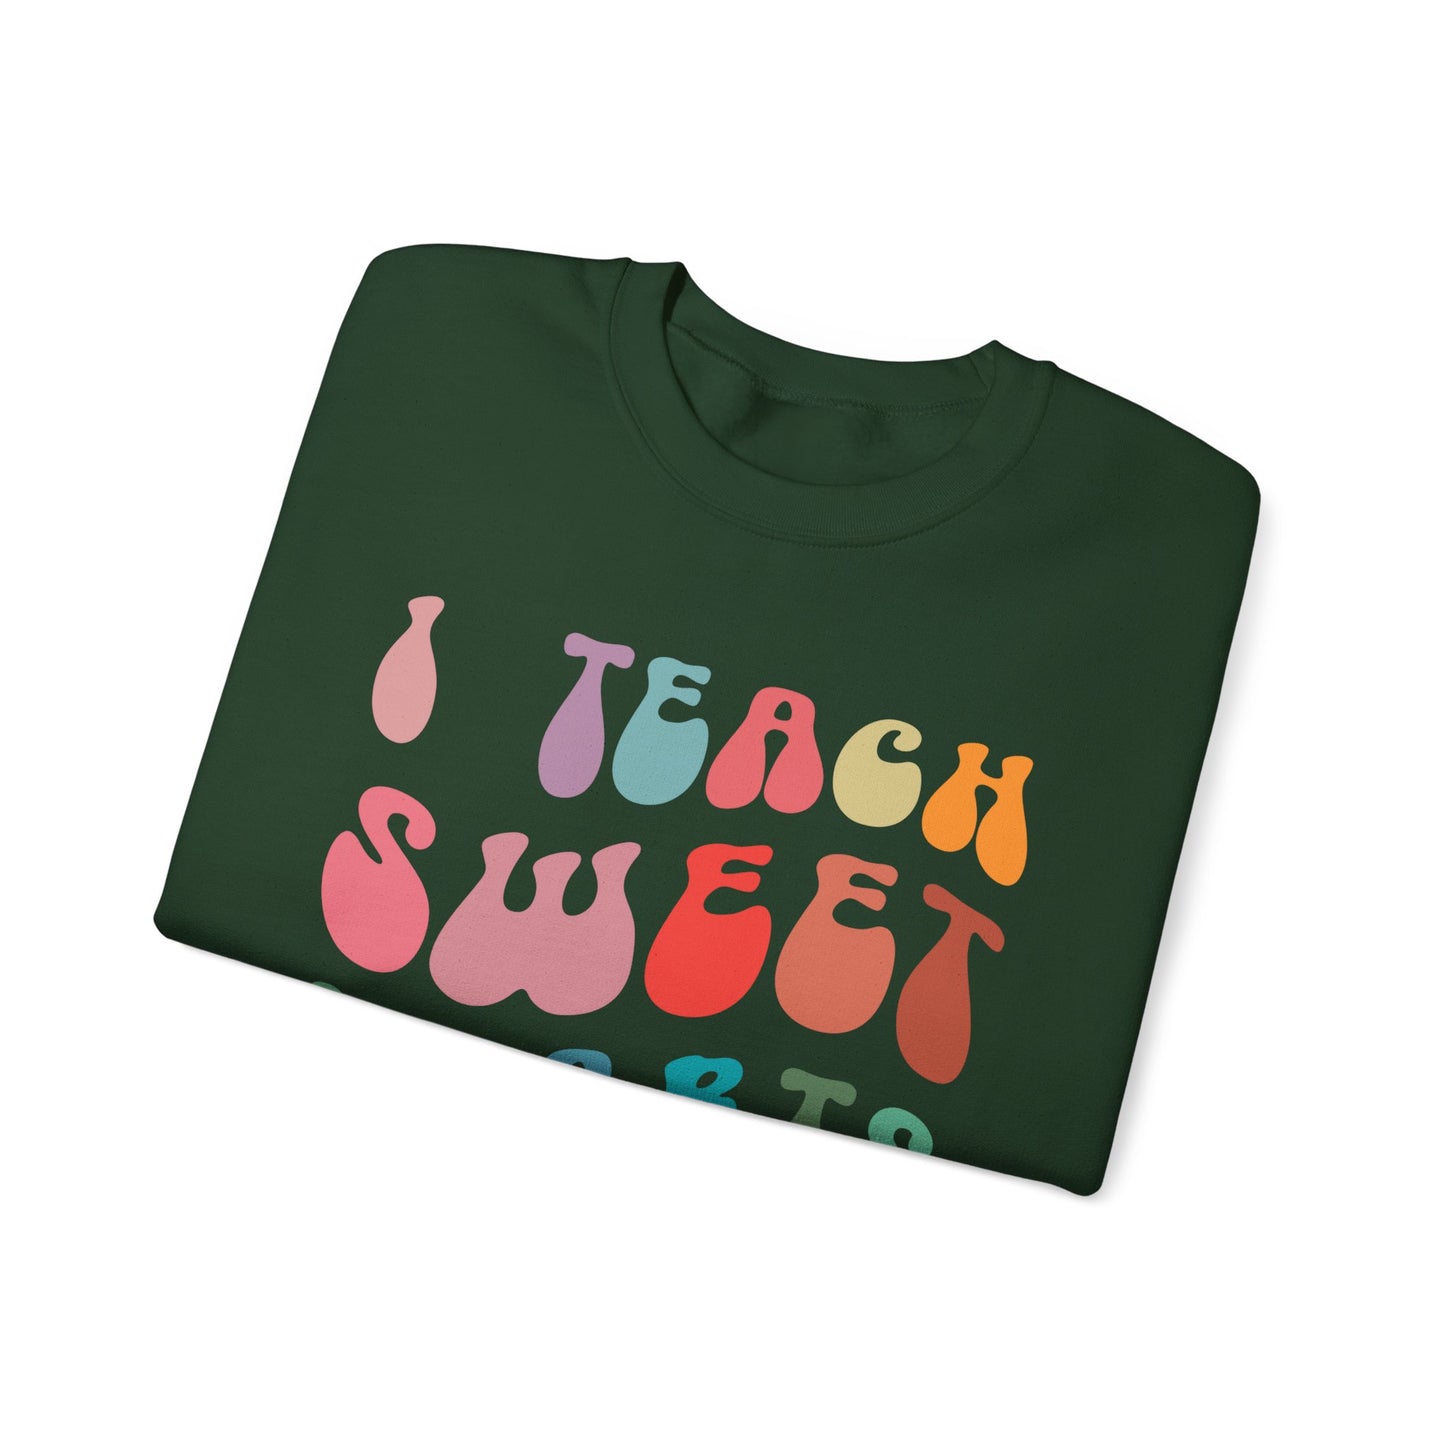 Personalized Teach Sweethearts Valentines Day Sweatshirt, Custom Teacher Valentines Day Sweatshirt for Teachers, Gift for Hearts Day, SW1276